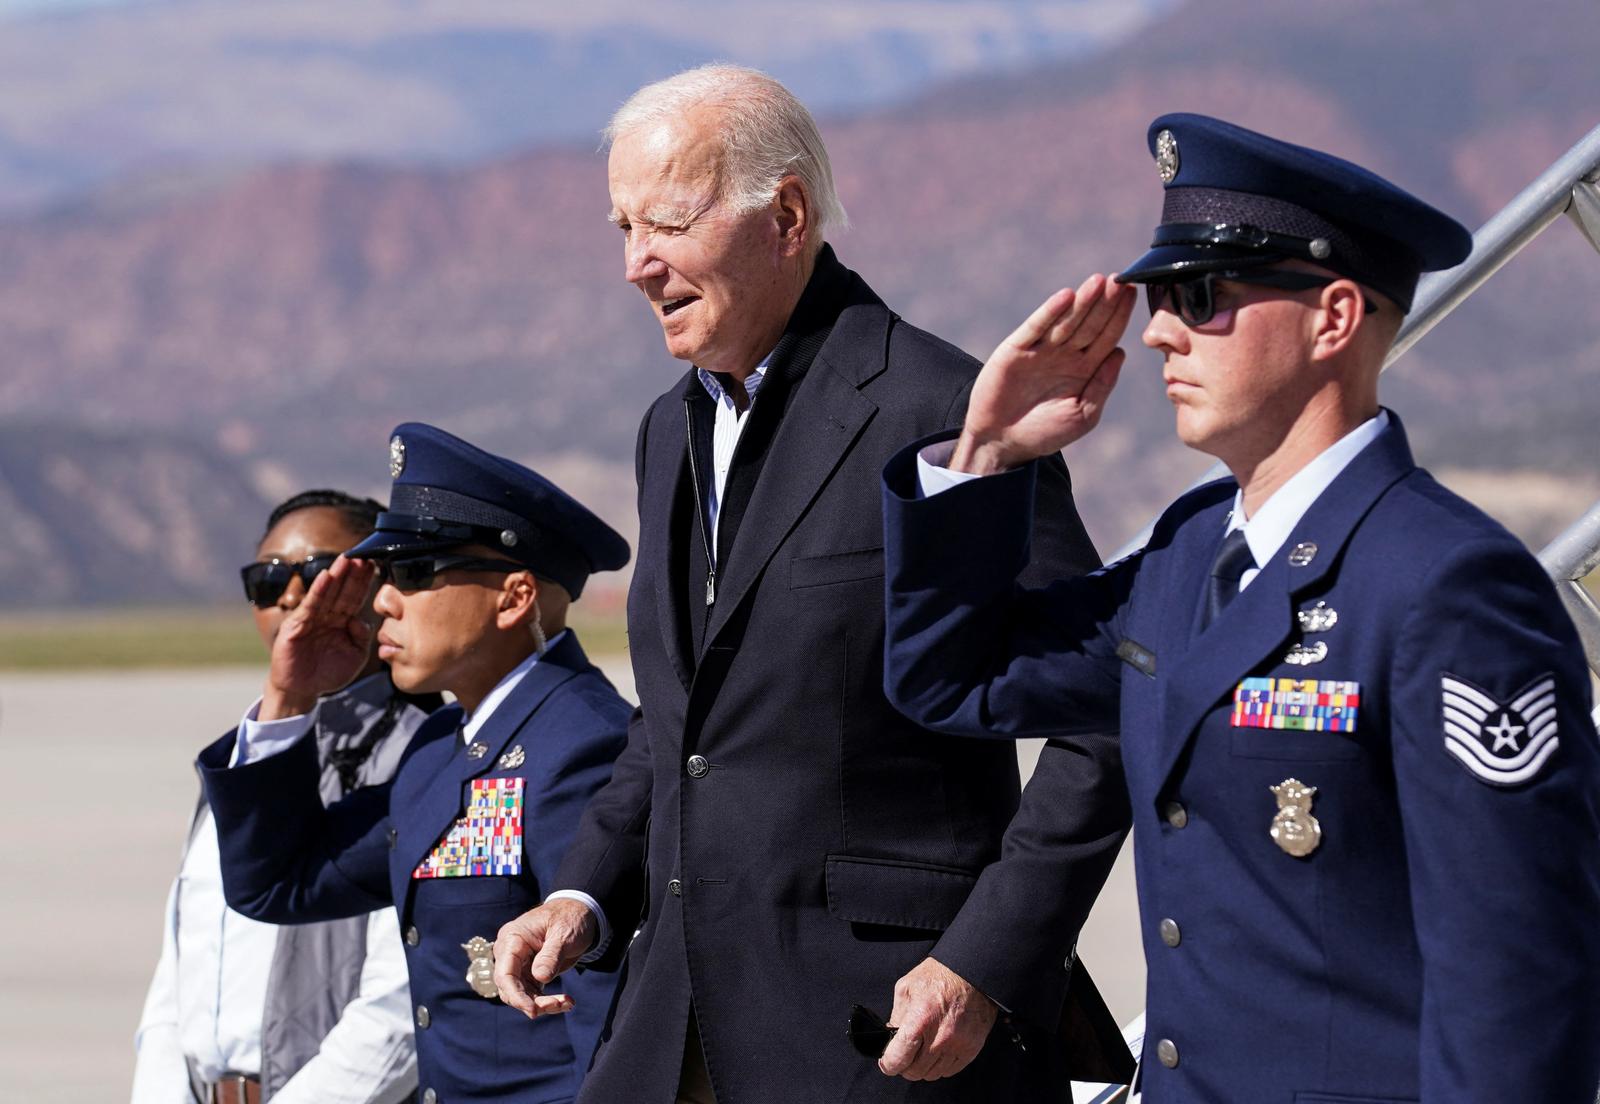 U.S. President Joe Biden disembarks from Air Force One as he arrives at Eagle County Regional Airport in Gypsum, Colorado, U.S., October 12, 2022. REUTERS/Kevin Lamarque Photo: KEVIN LAMARQUE/REUTERS